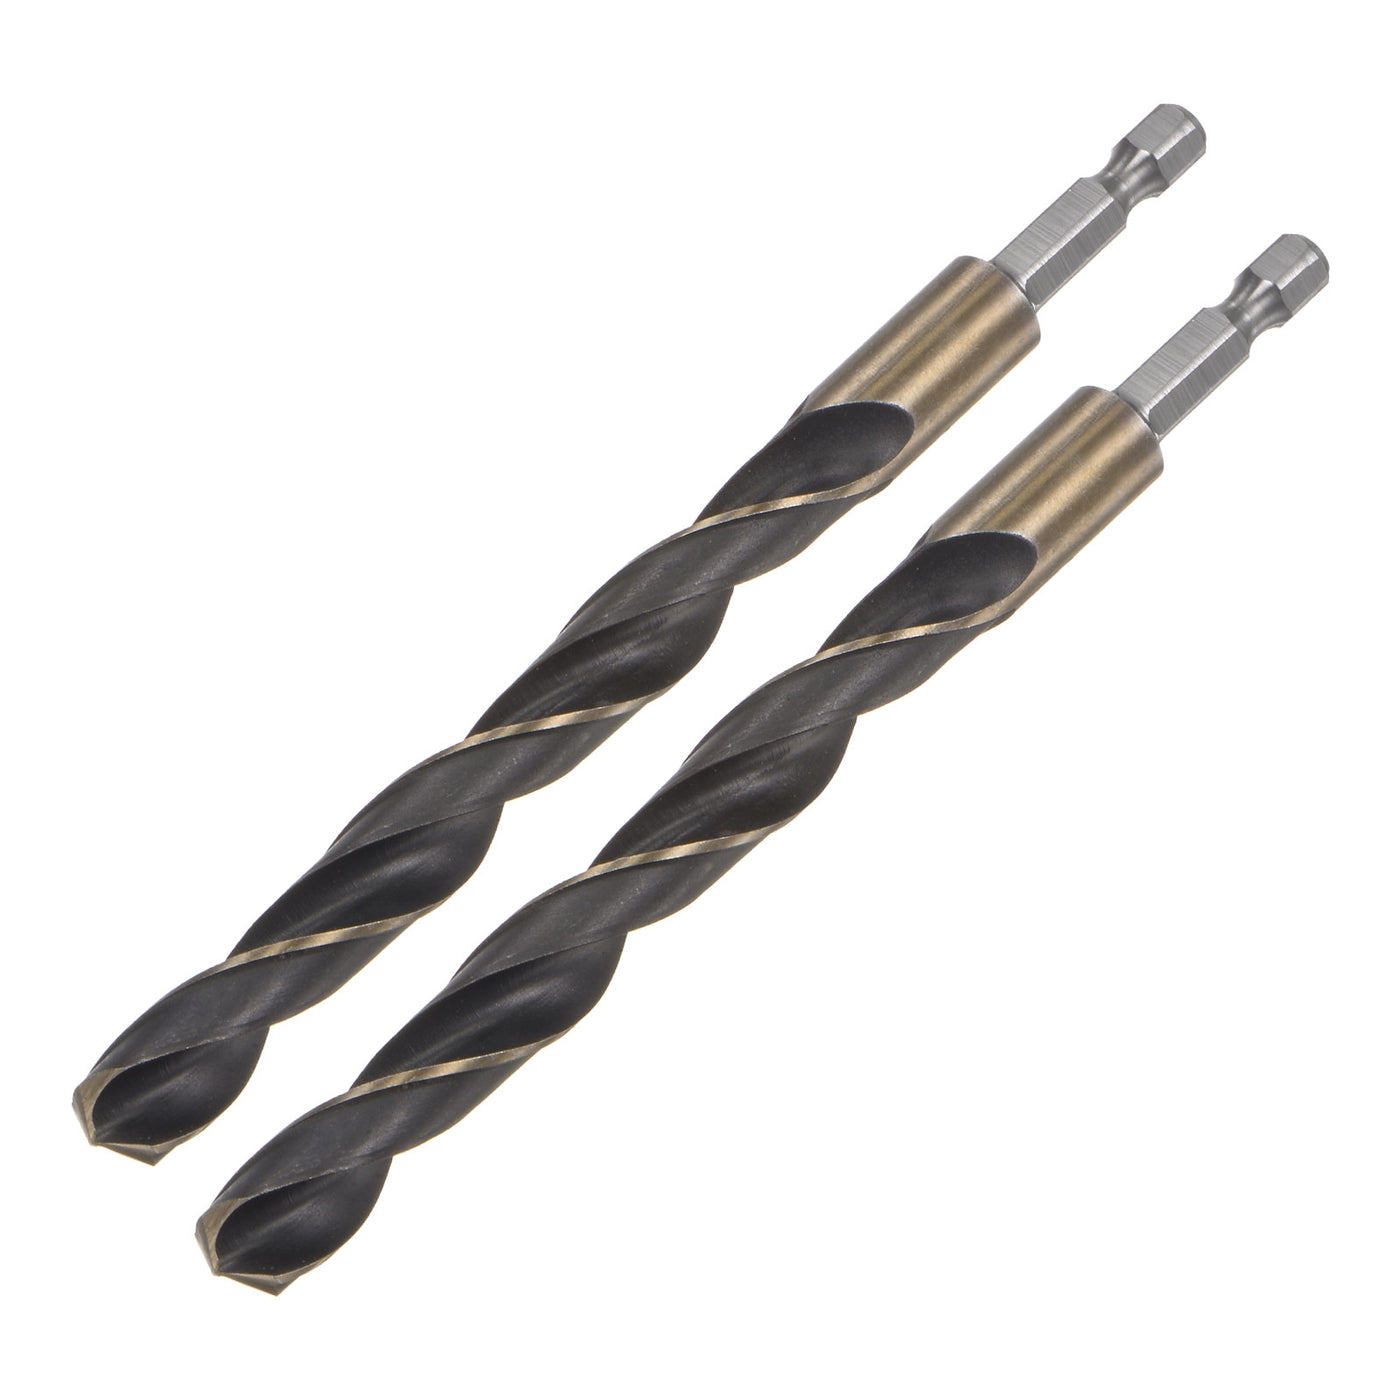 uxcell Uxcell 2Pcs 11mm High Speed Steel Twist Drill Bit with Hex Shank 143mm Length